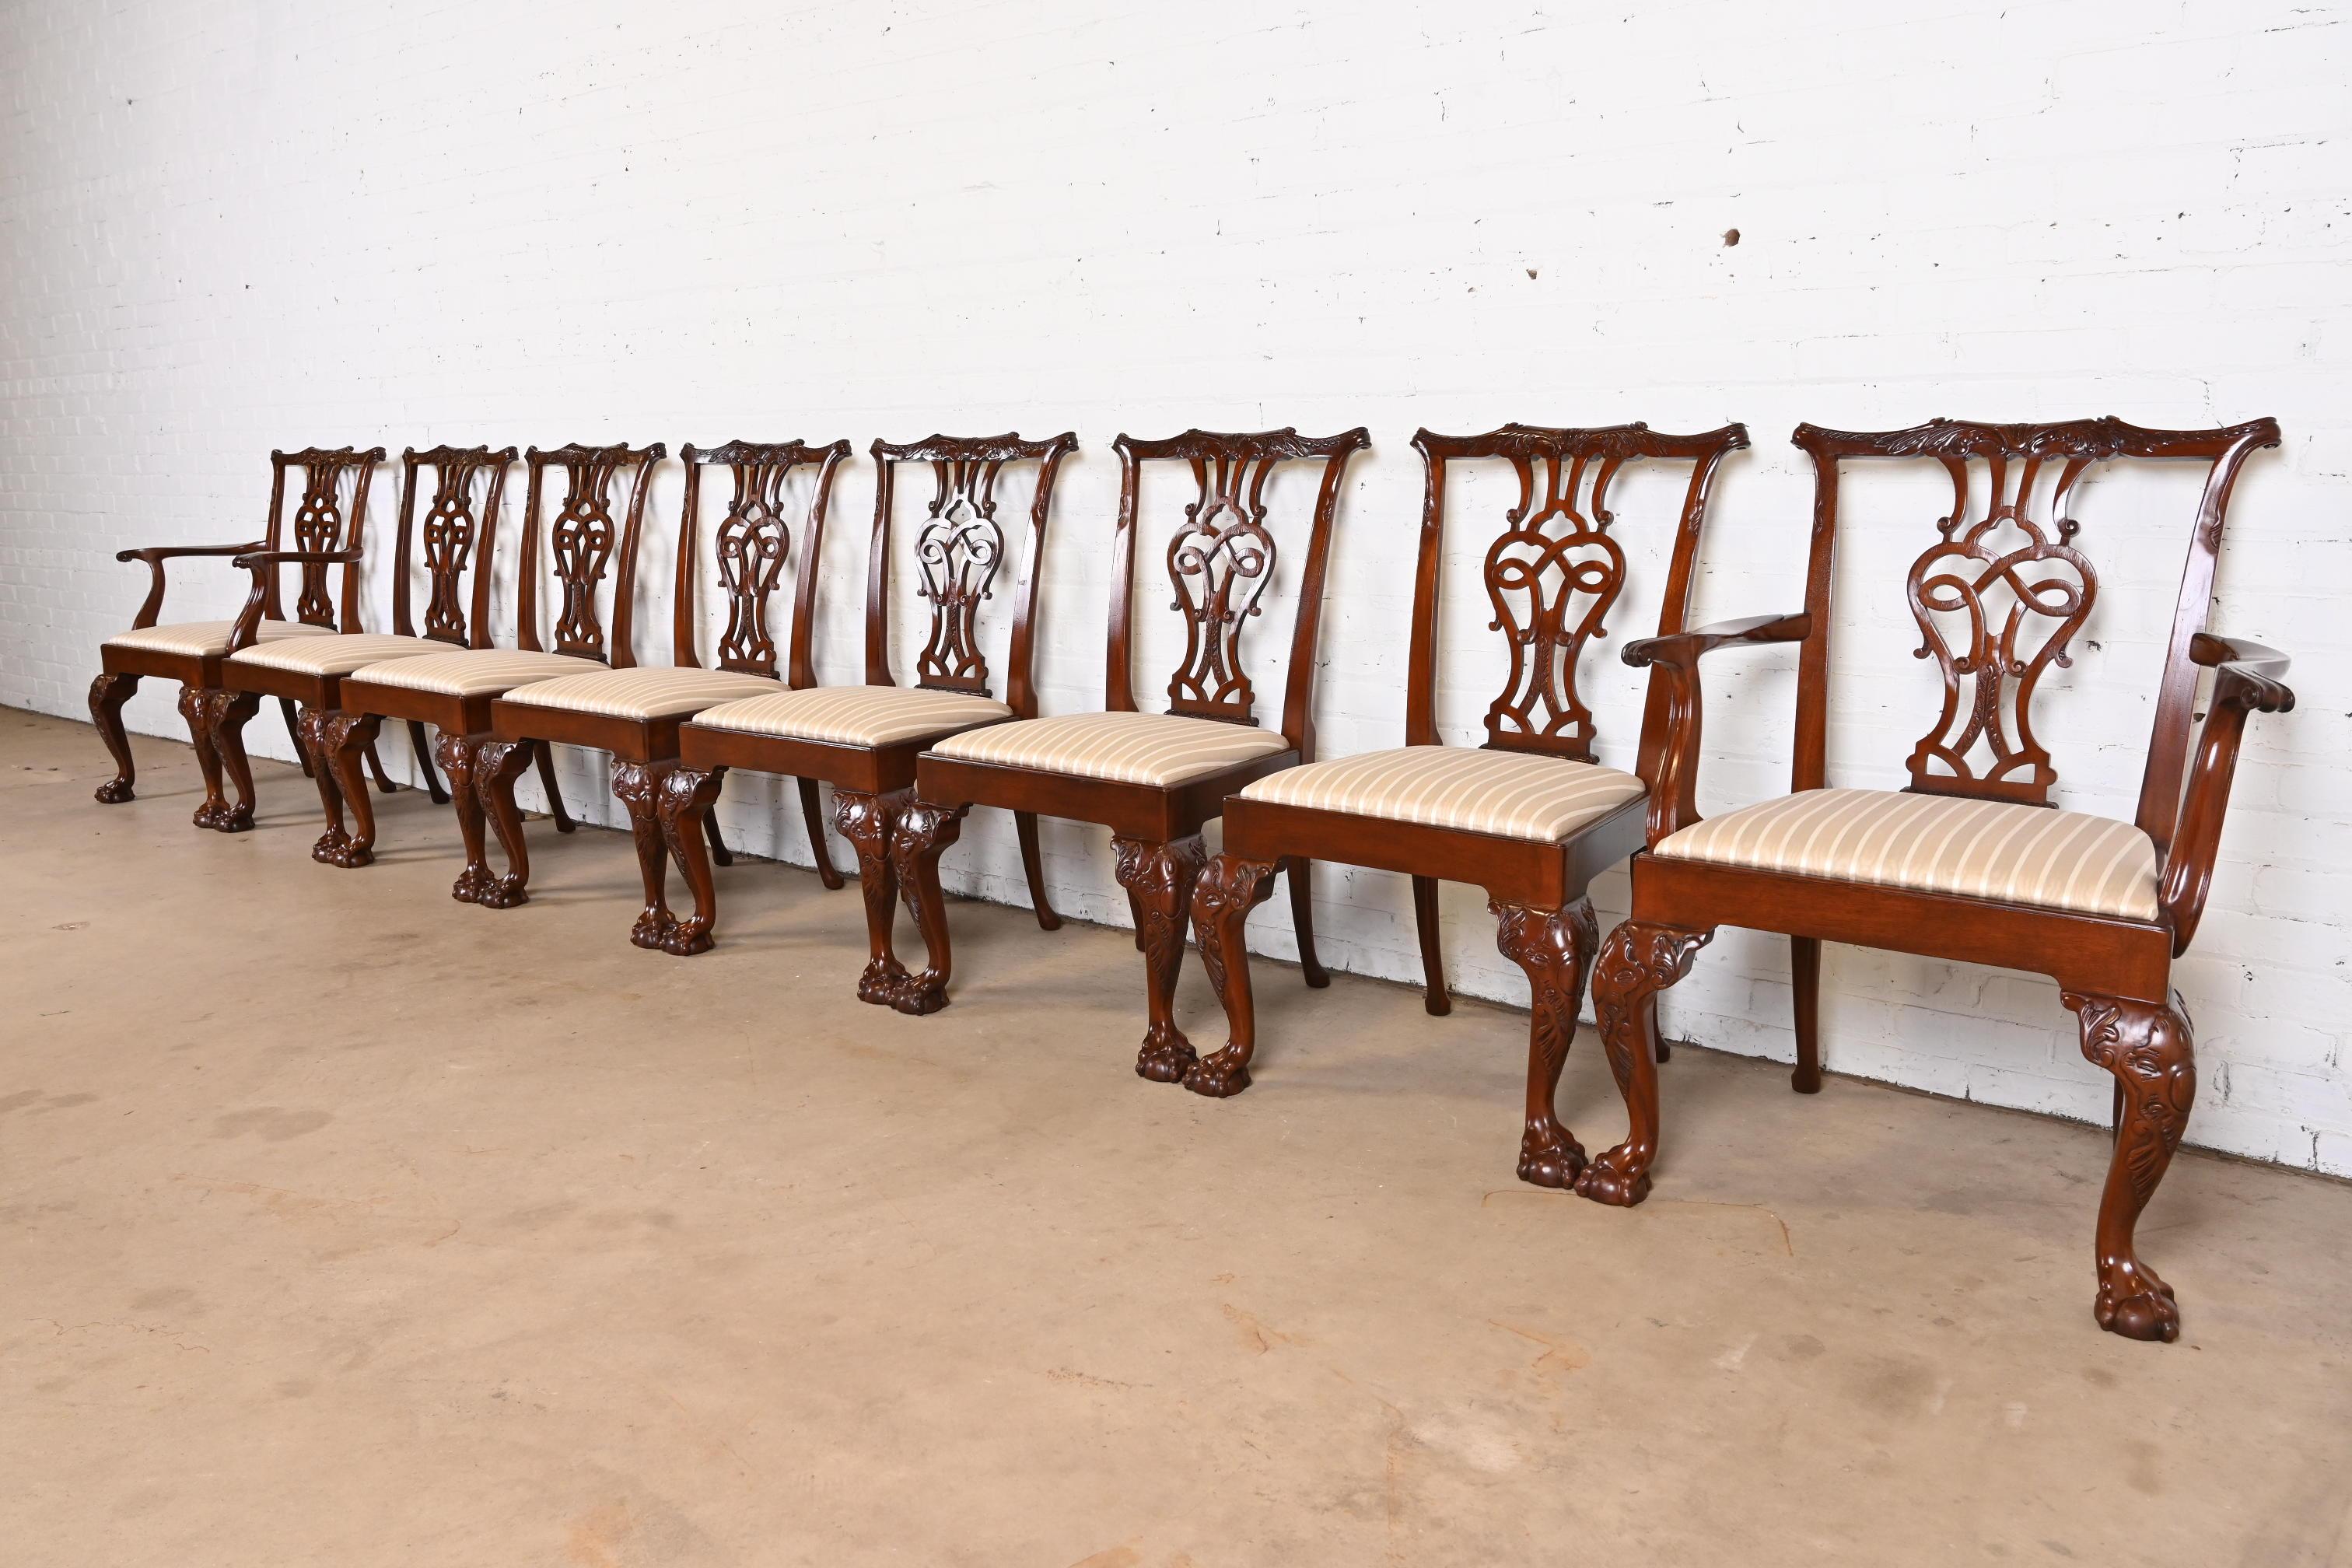 A rare and exceptional set of eight fine Chippendale carved mahogany dining chairs from the exclusive Stately Homes Collection by Baker Furniture.

The set includes two open armchairs and six side chairs. The chairs feature shaped back supports with